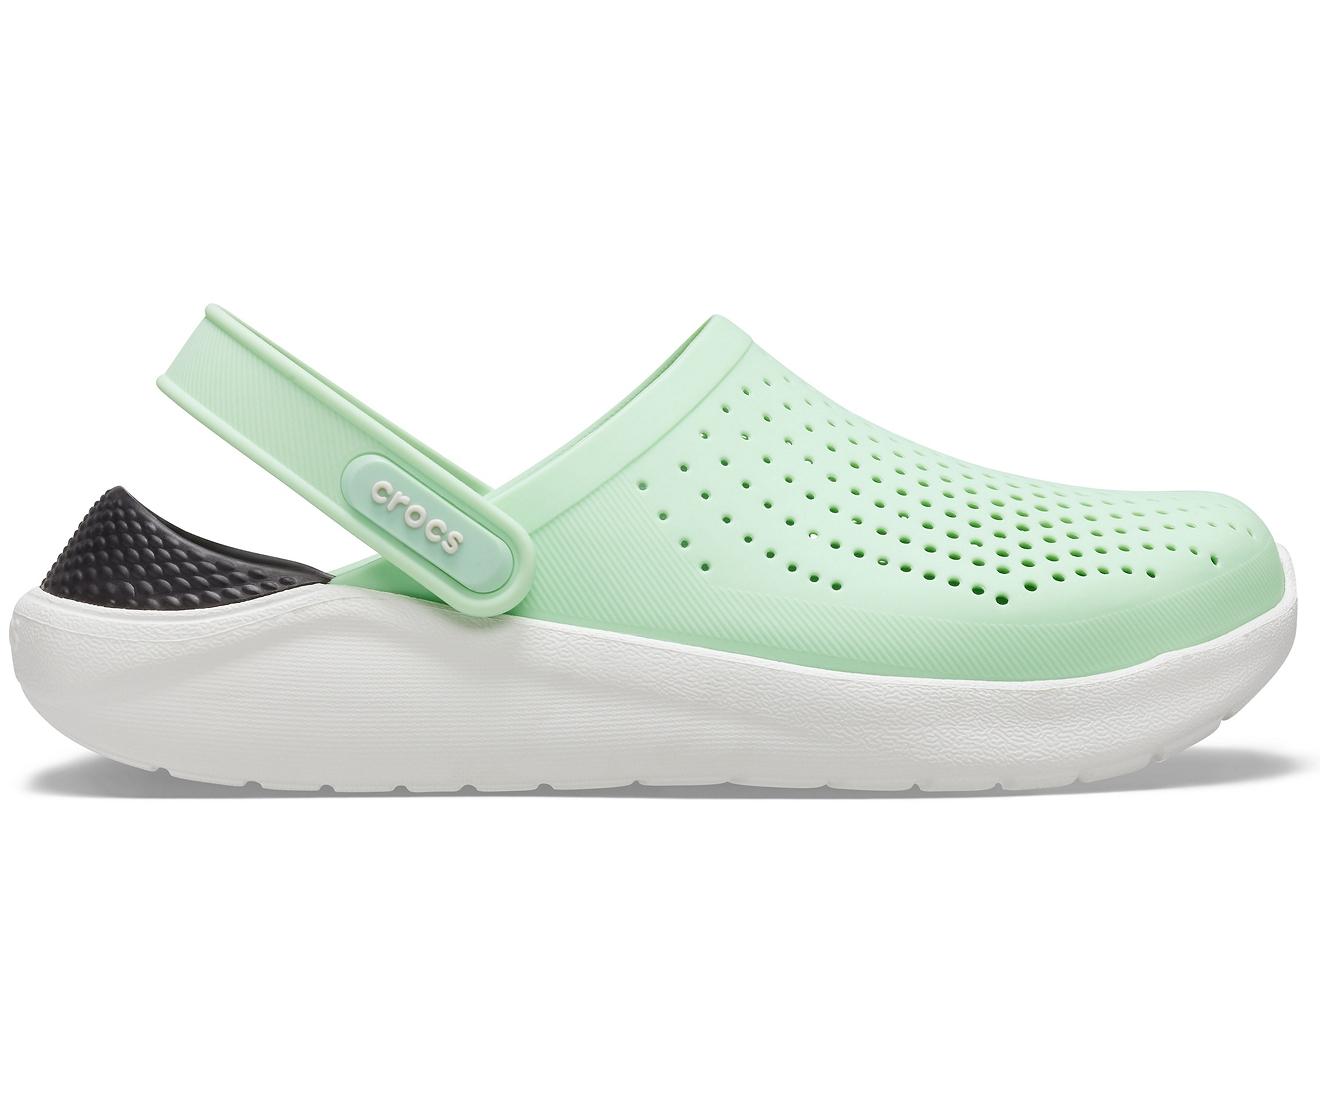 Crocs™ Neo Mint / Almost White Literide Clog in Green - Lyst